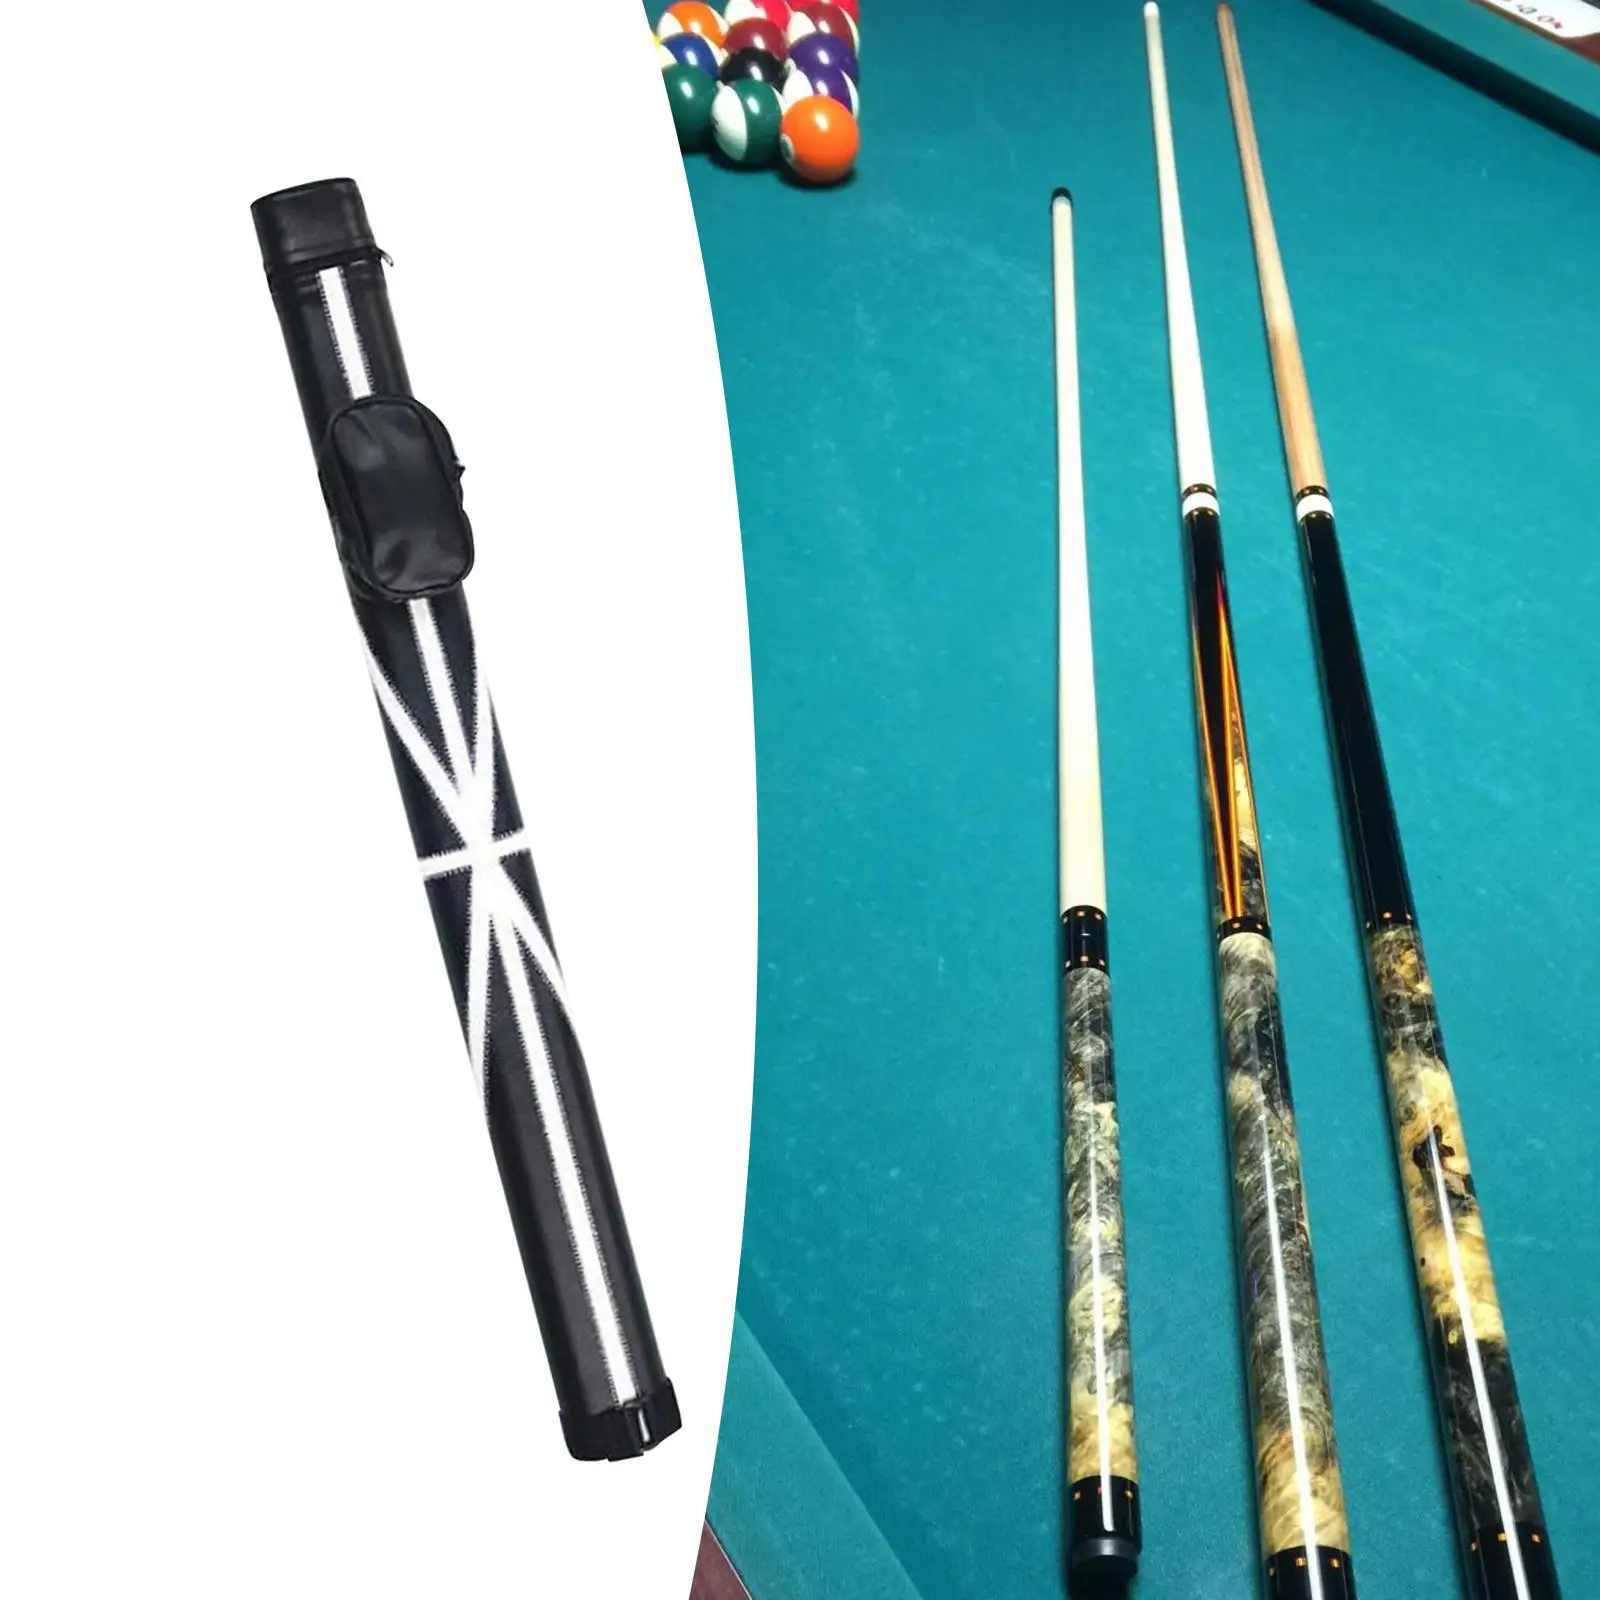 Billiards Pool PU Protector with Zipper for Travel Snooker Outdoor